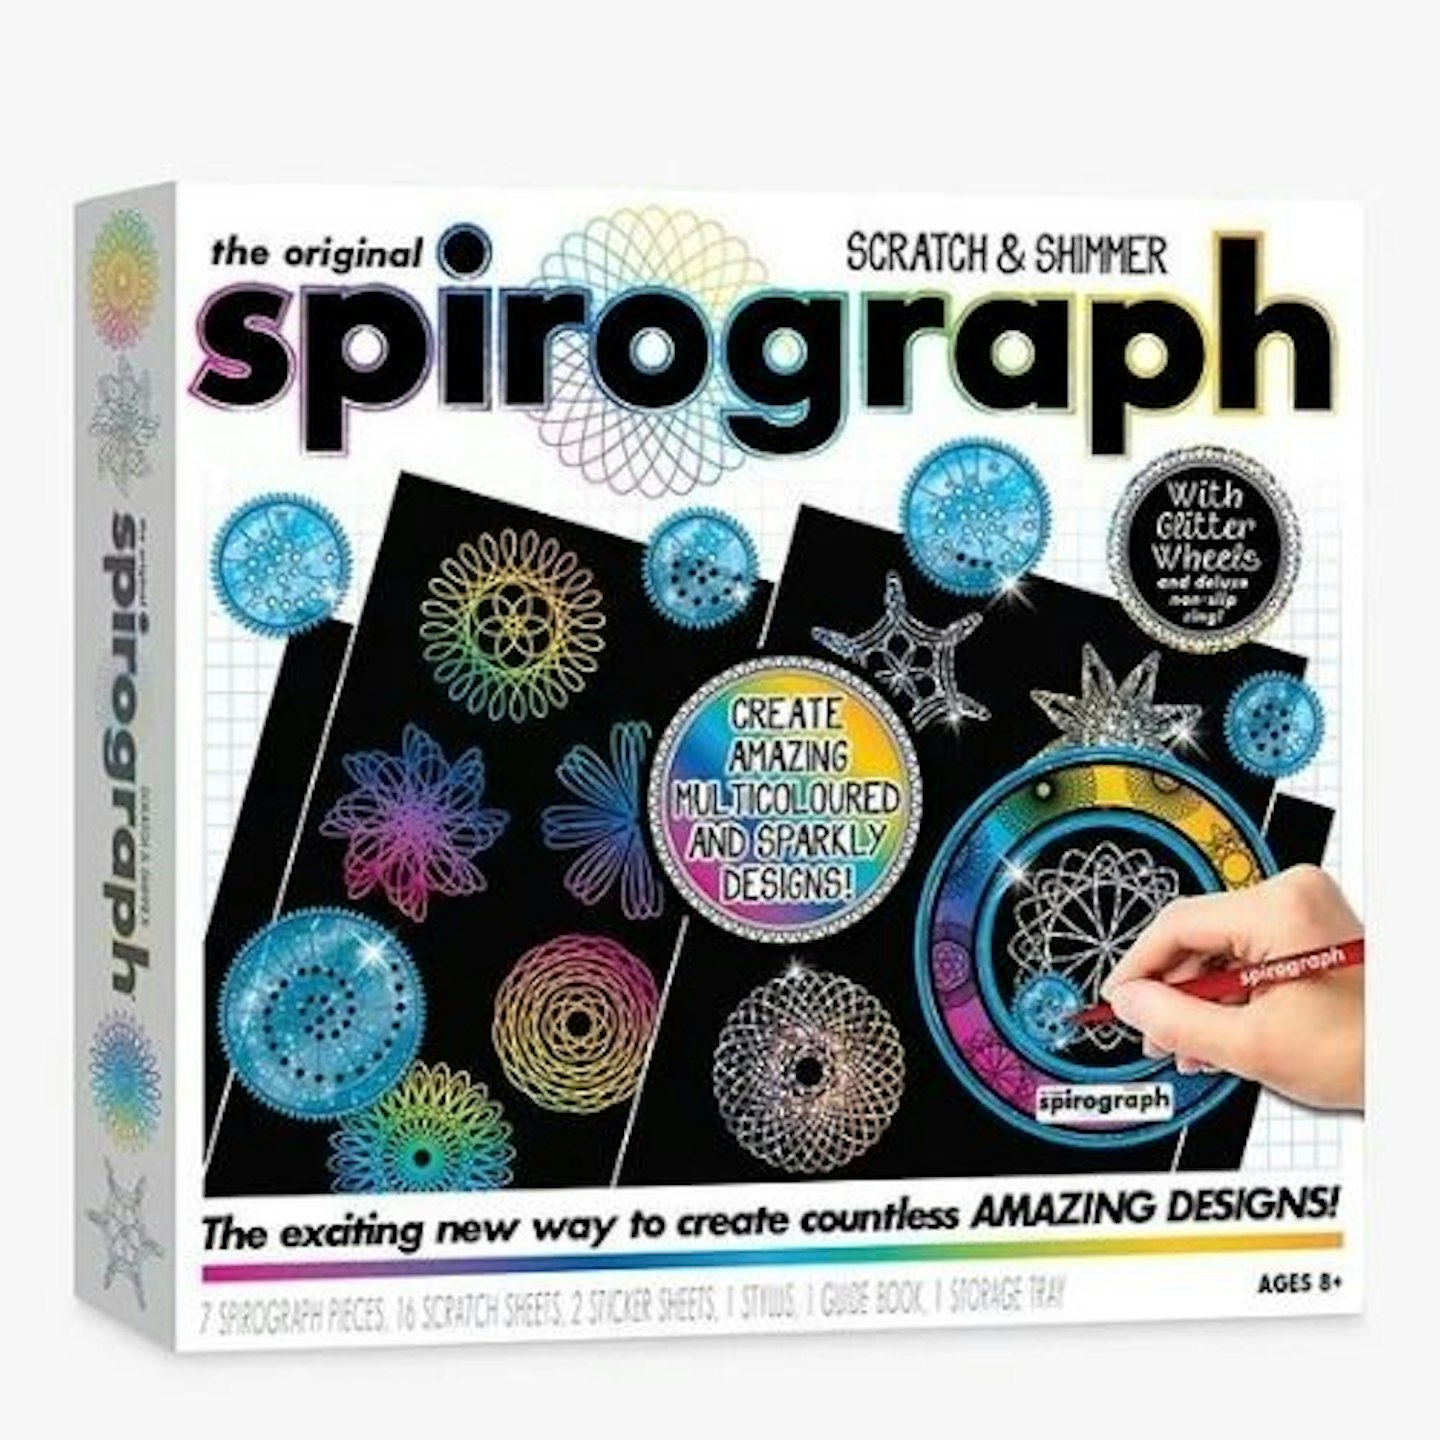 Top Christmas Toys: Interplay Spirograph Scratch and Shimmer Set